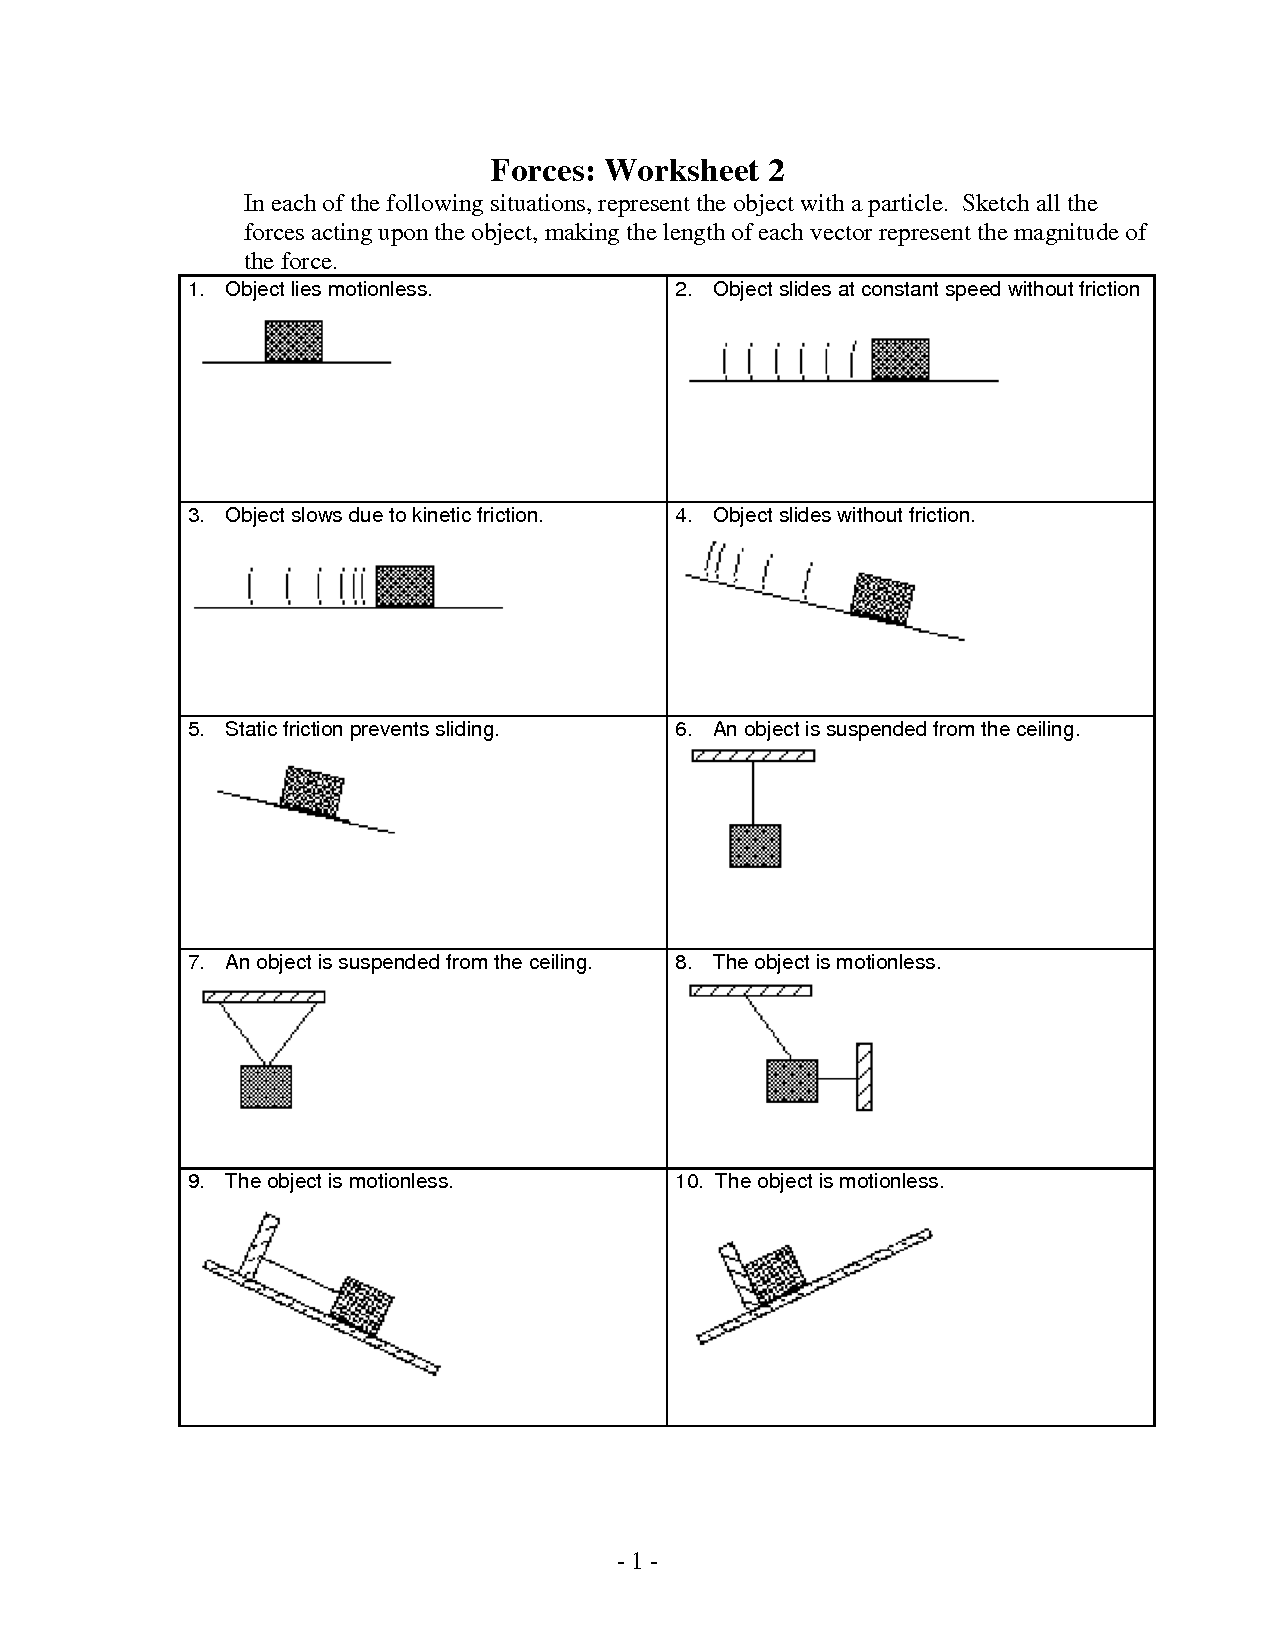 Radial Net Force Worksheet 2 Answers